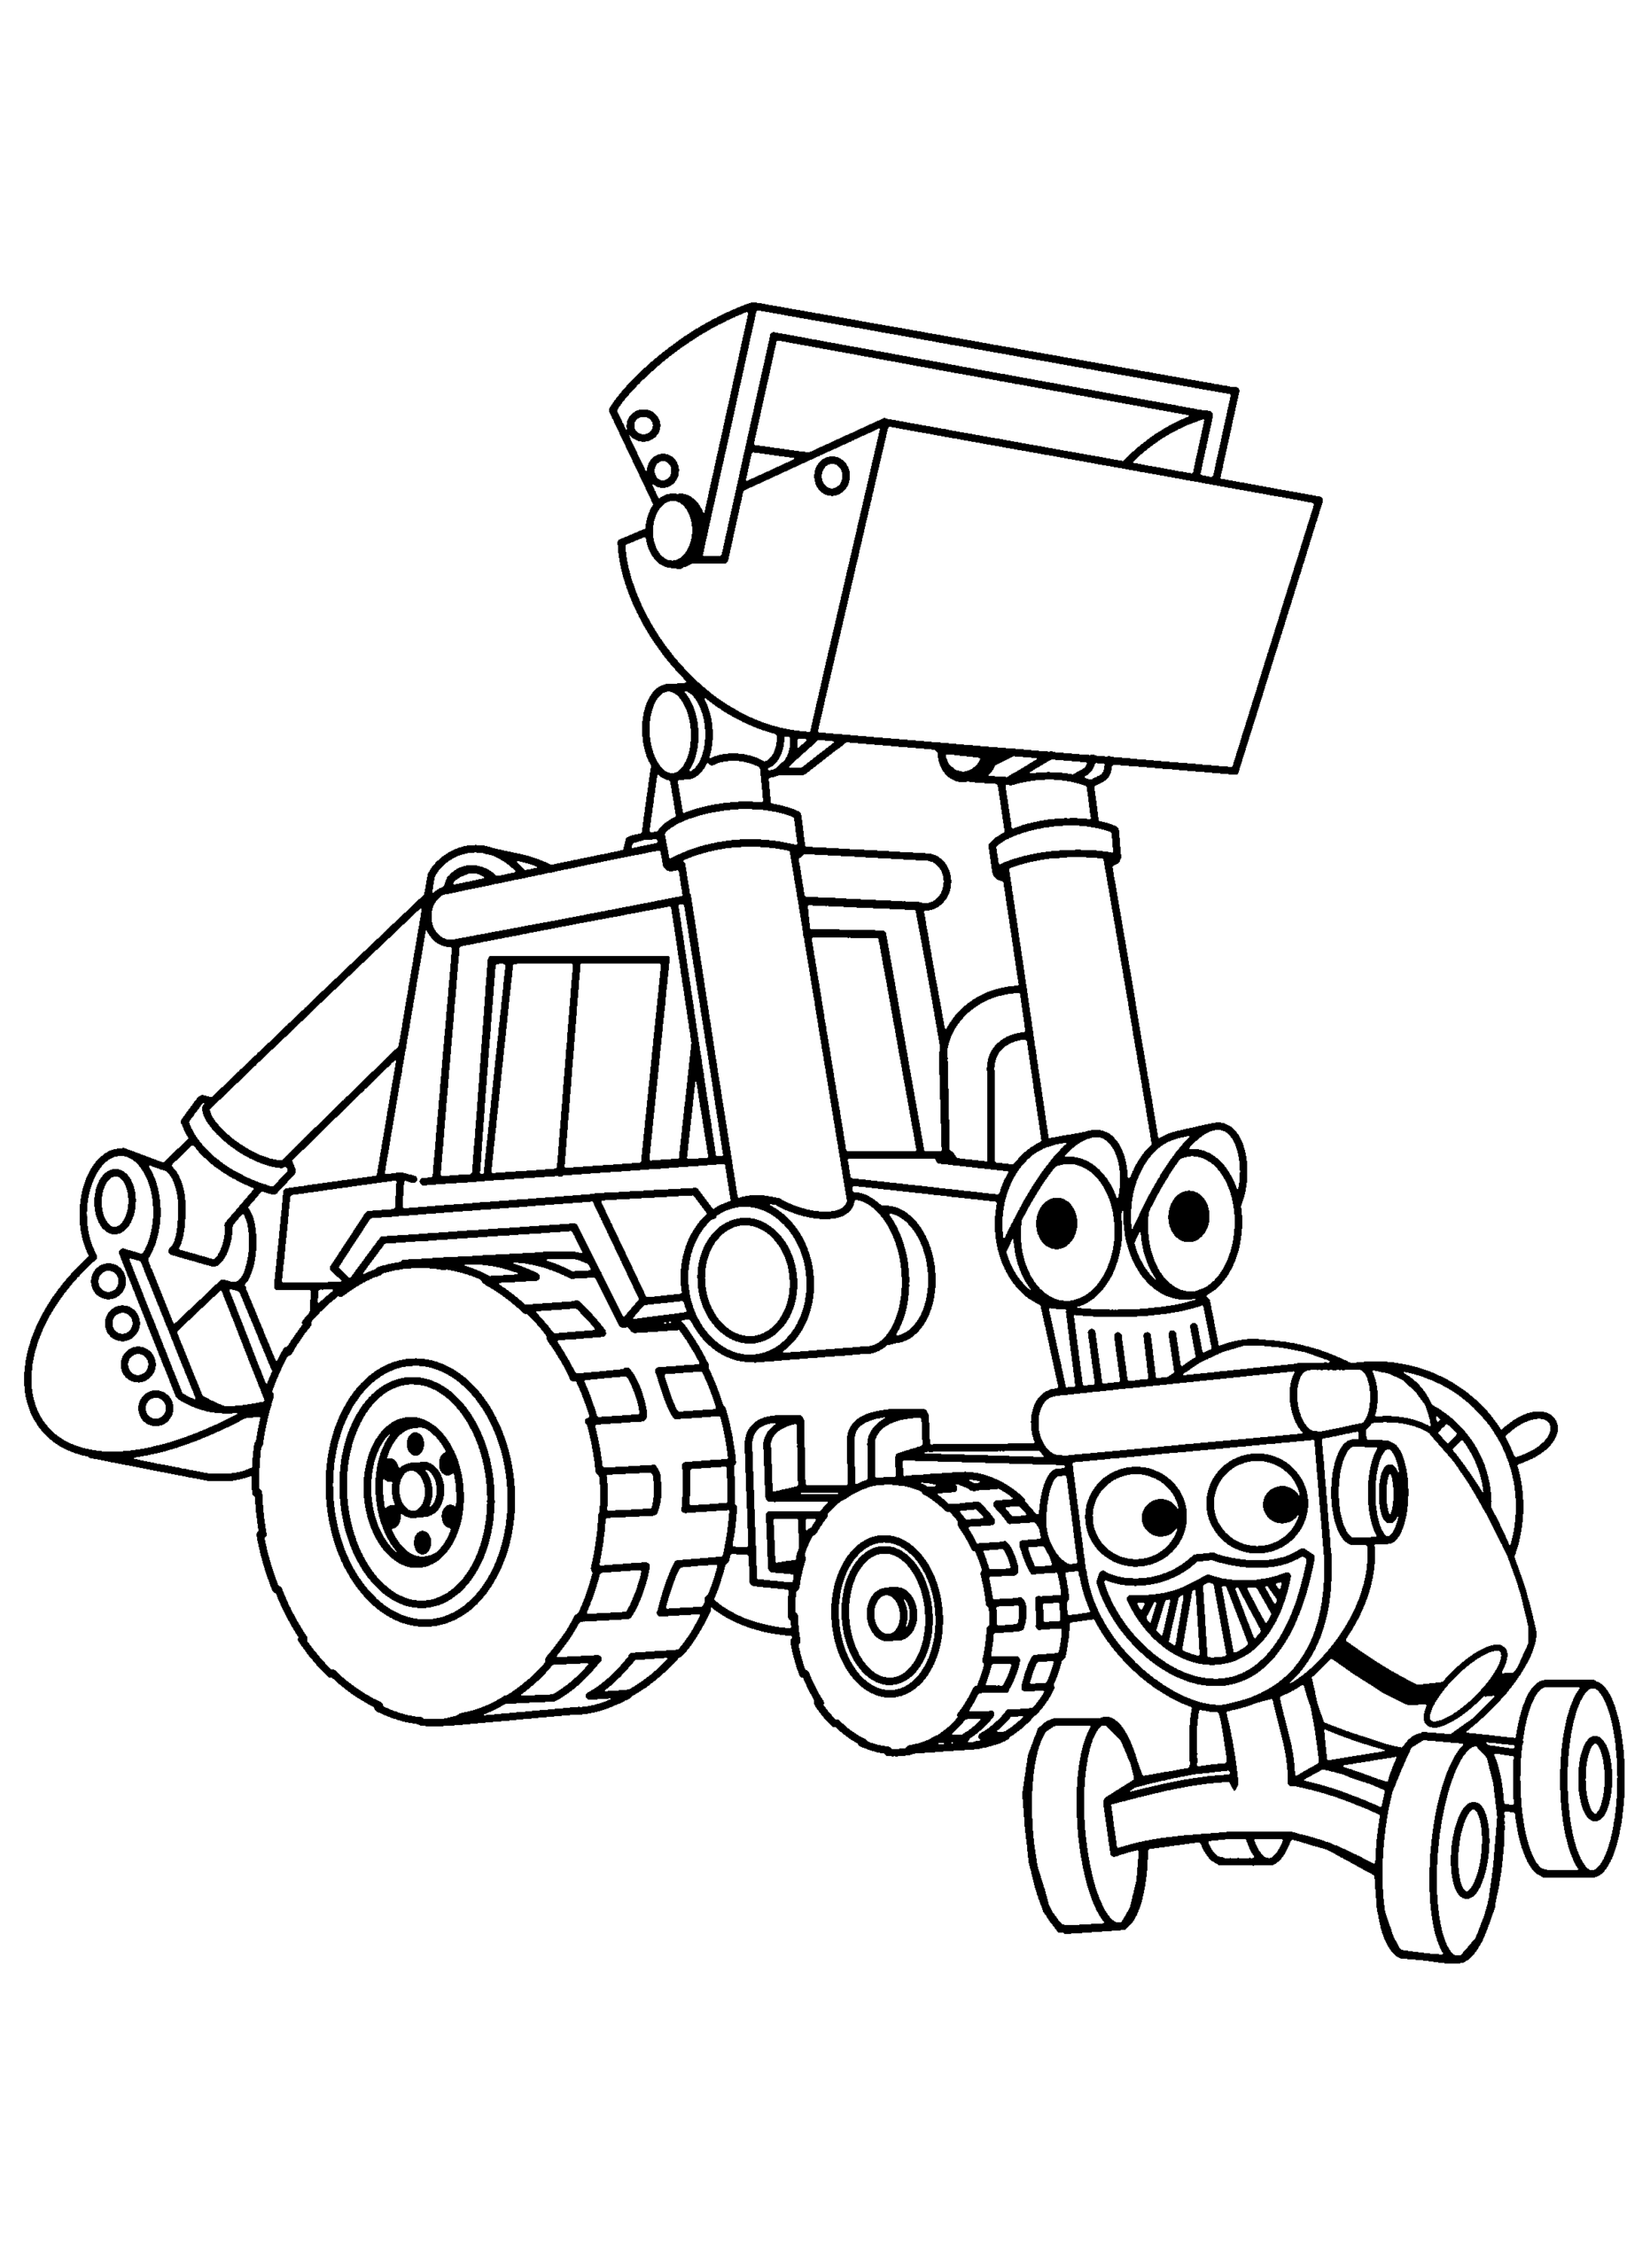 Bob the Builder Coloring Pages TV Film bob the builder 51 Printable 2020 01071 Coloring4free